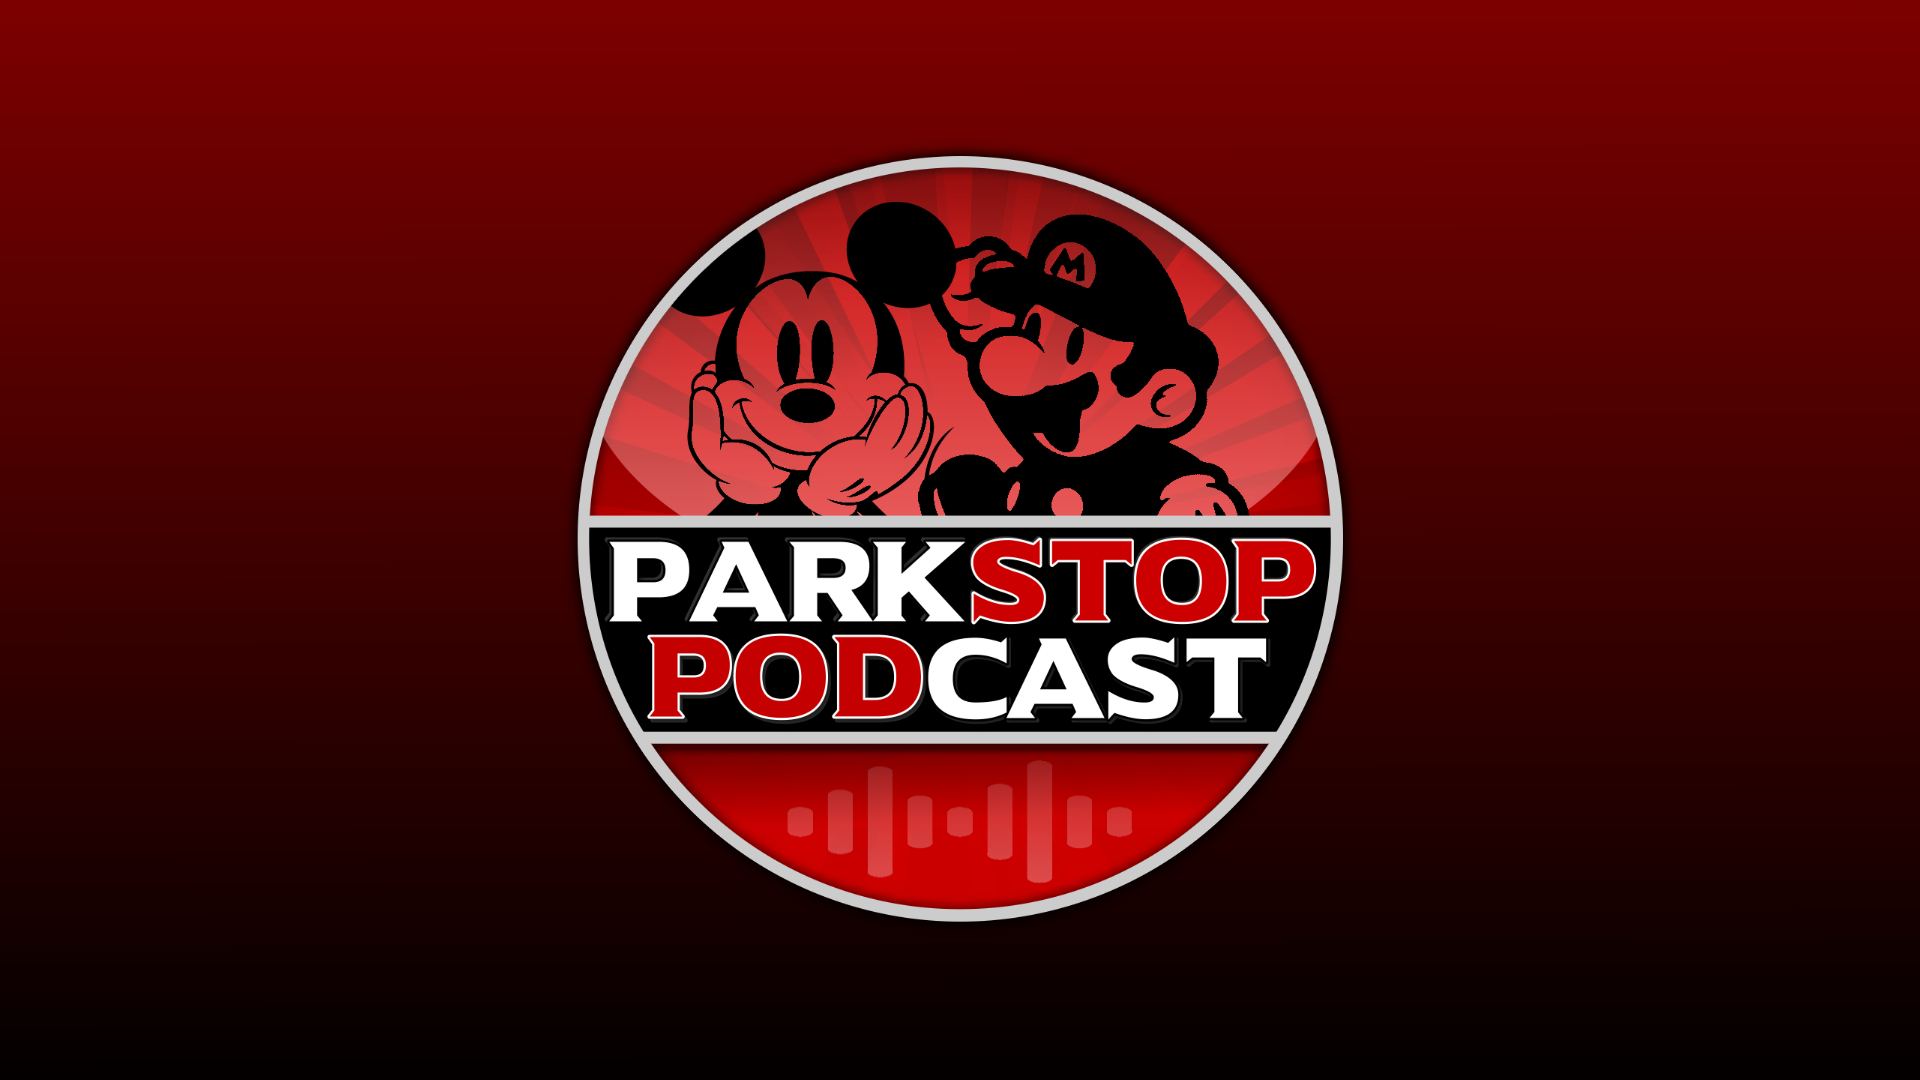 ParkStop Podcast: Episode 34 – Avengers Campus and WDW’s 50th Anniversary